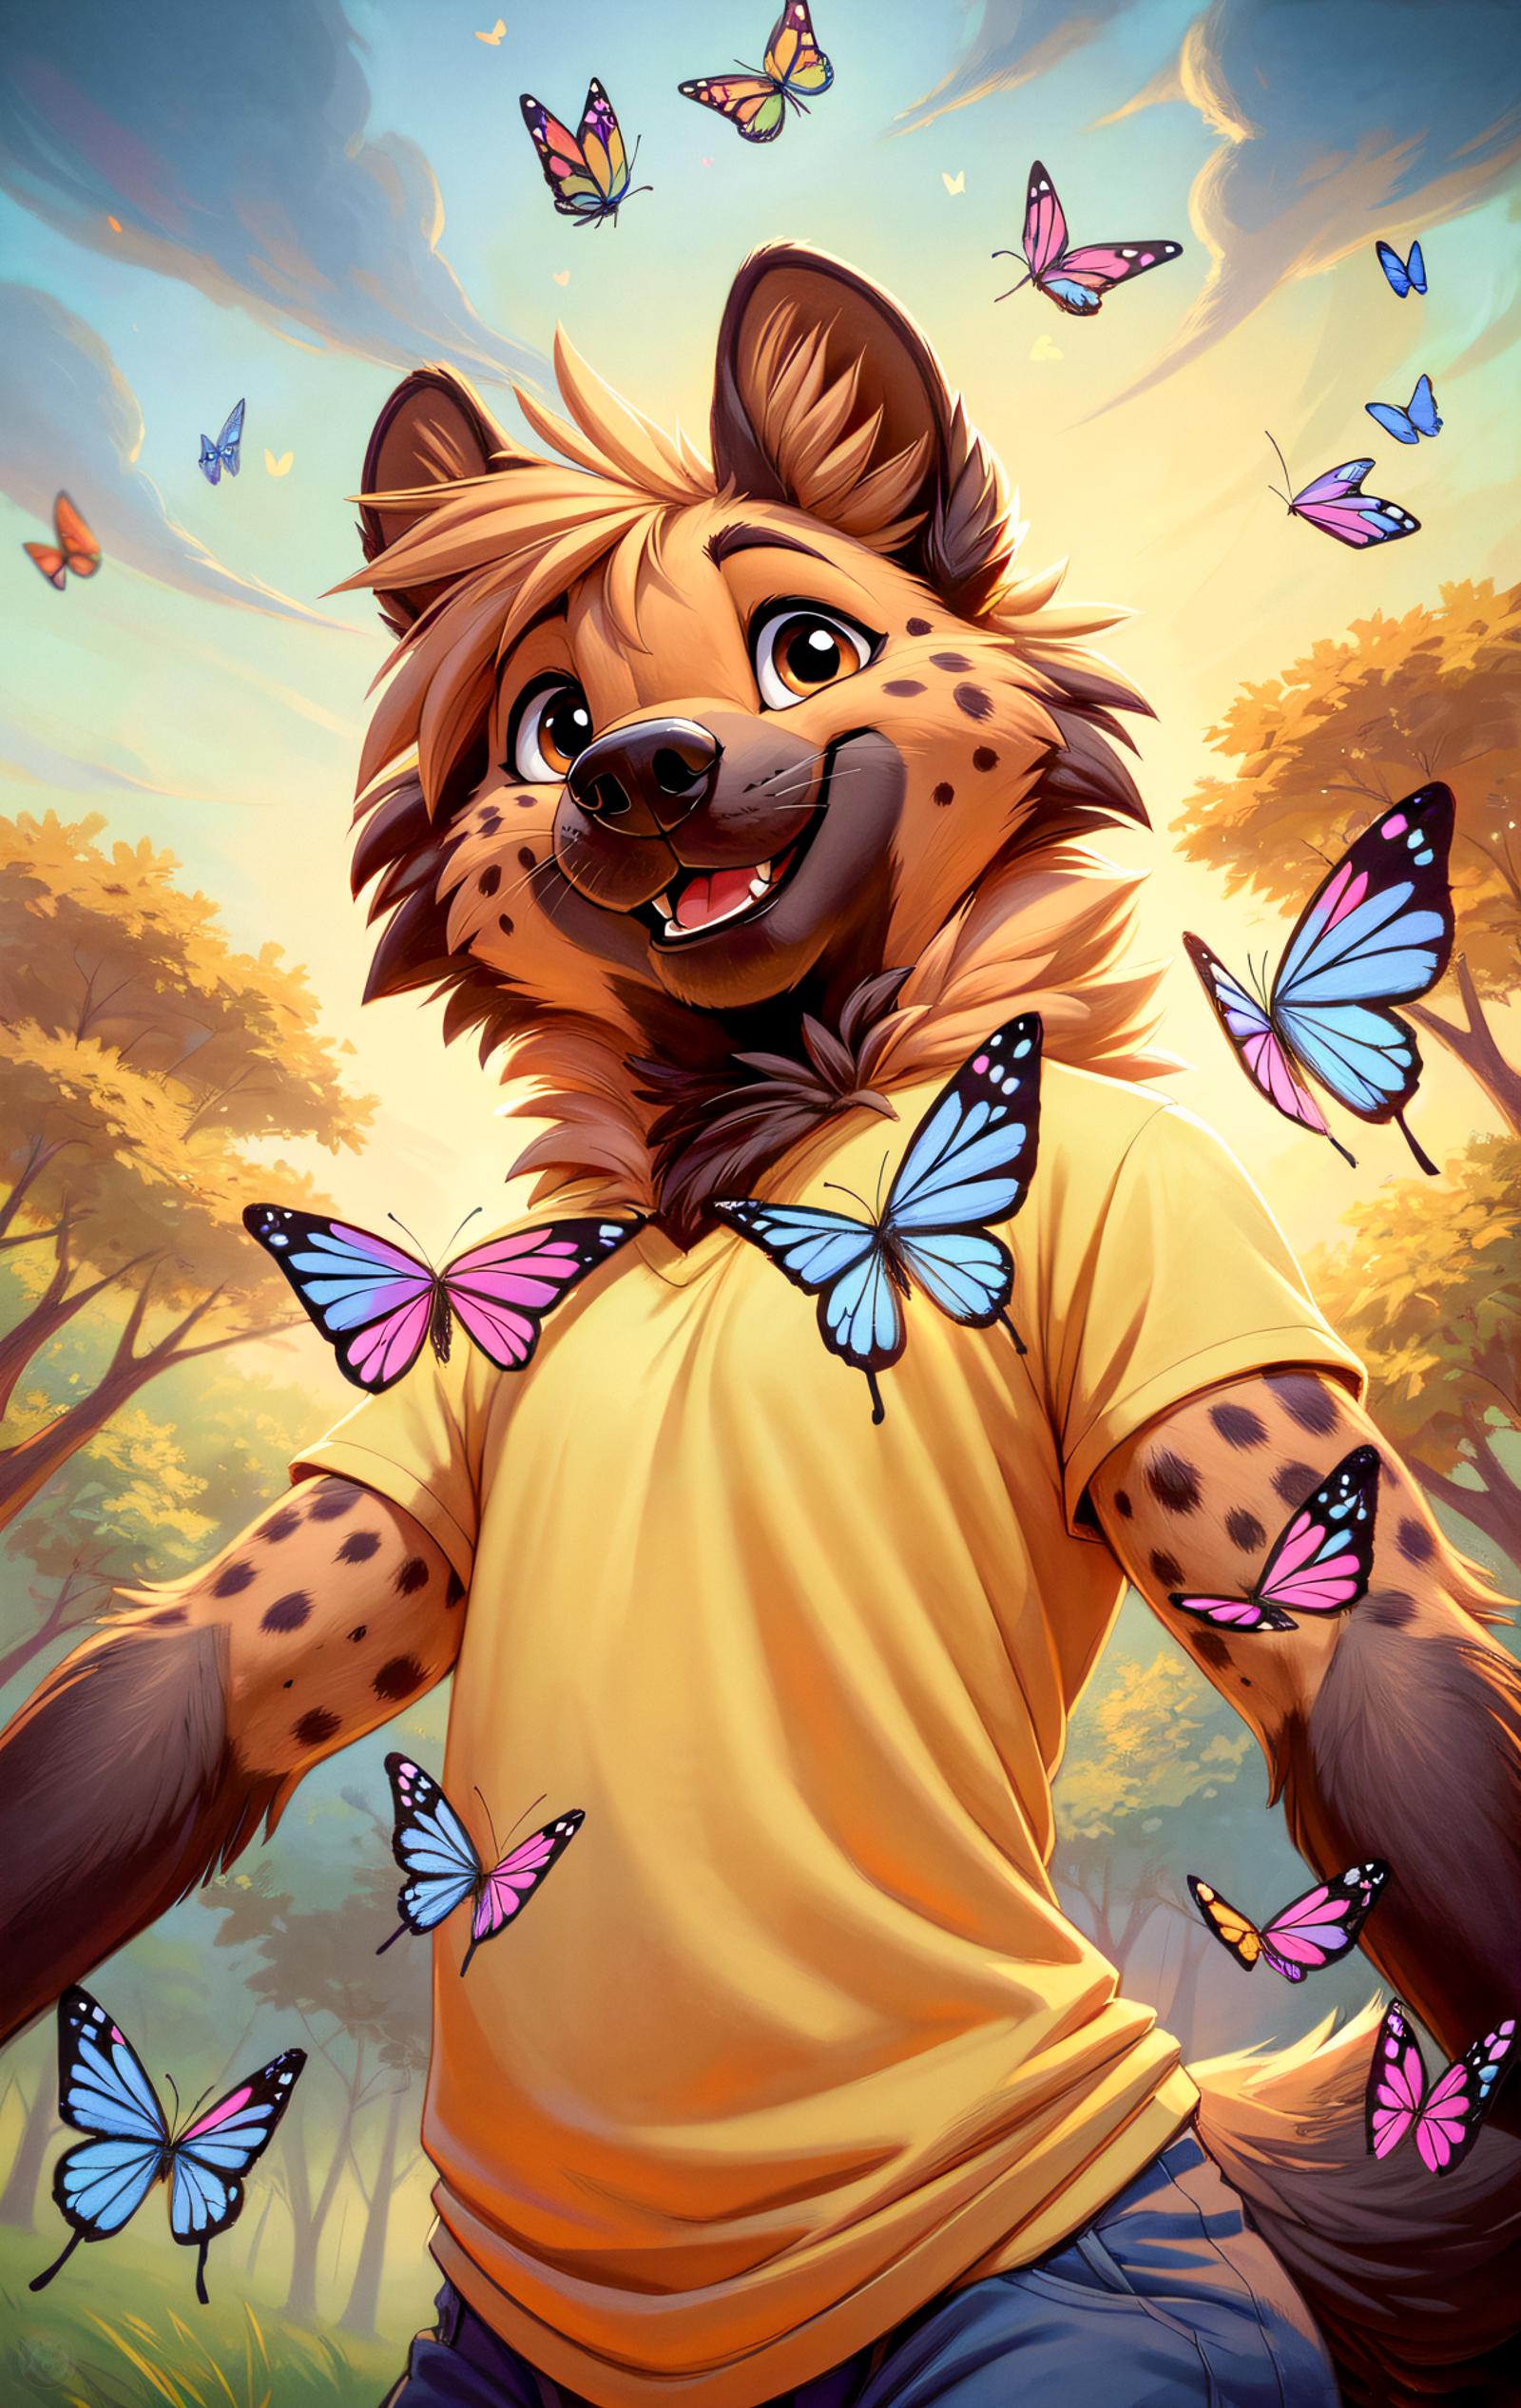 A cartoon image of a dog wearing a yellow shirt and surrounded by butterflies.